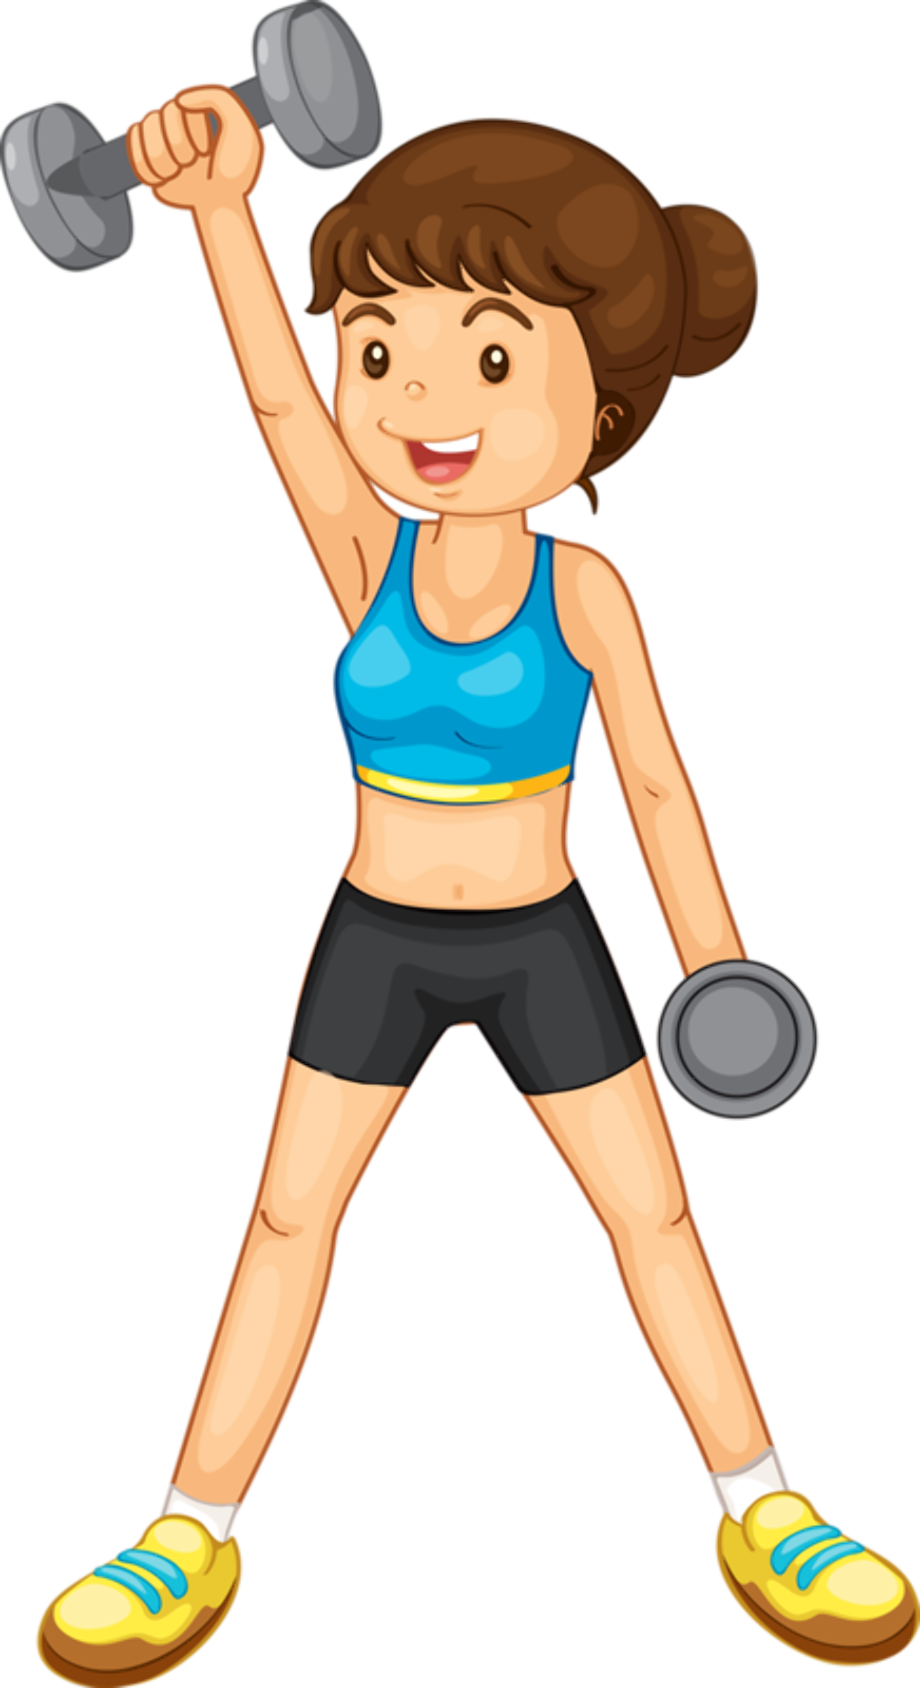 Download High Quality exercise clipart jumping jacks Transparent PNG